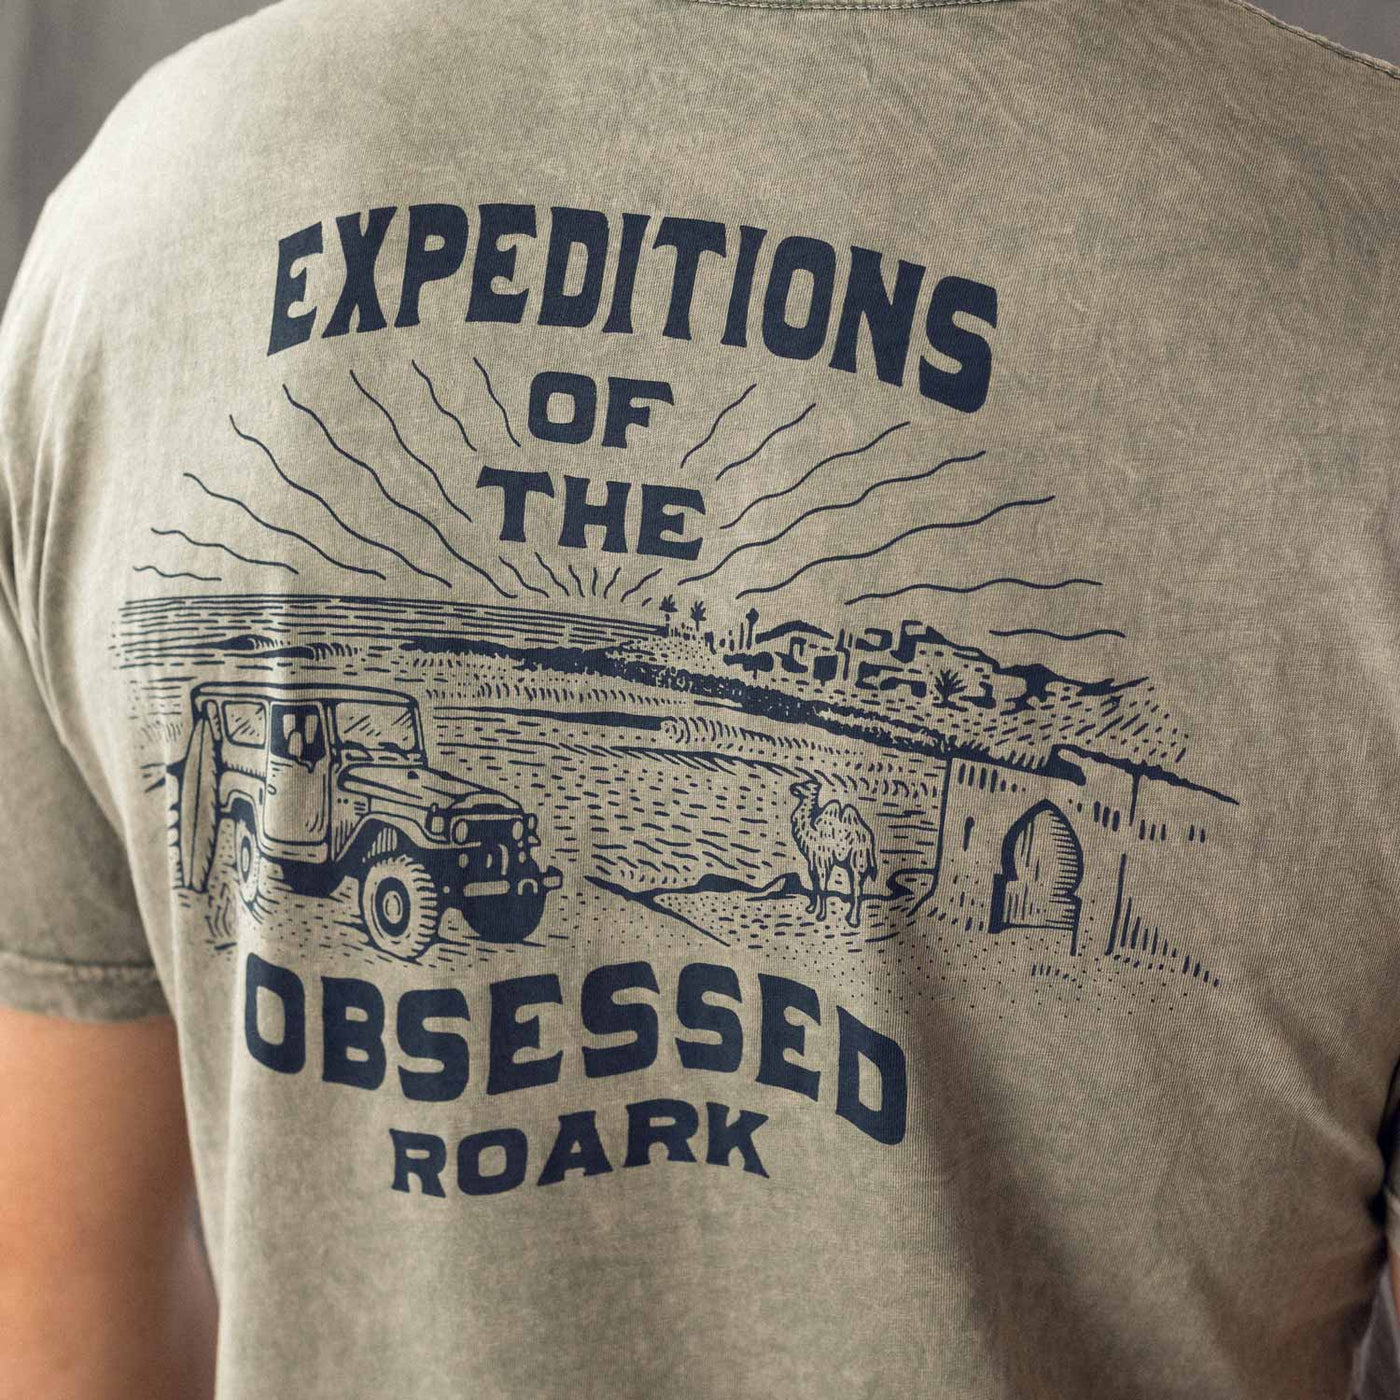 ROARK - T-shirt - Expeditions of the obsessed - grå washed